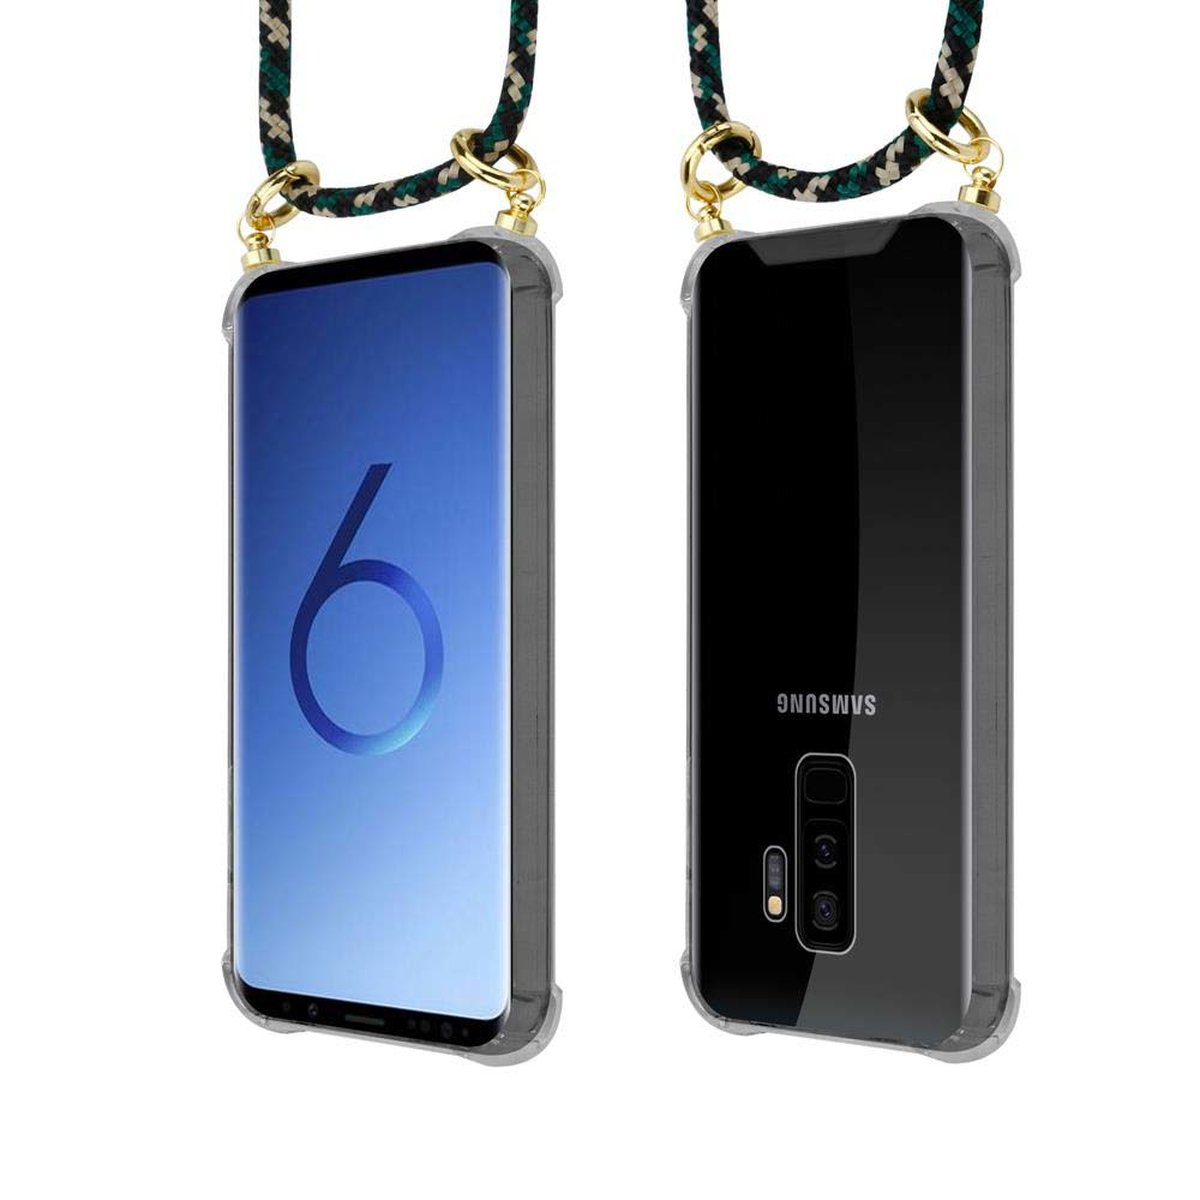 Samsung, und Backcover, abnehmbarer Hülle, CAMOUFLAGE Galaxy PLUS, Ringen, S9 Band mit Handy Gold Kette CADORABO Kordel